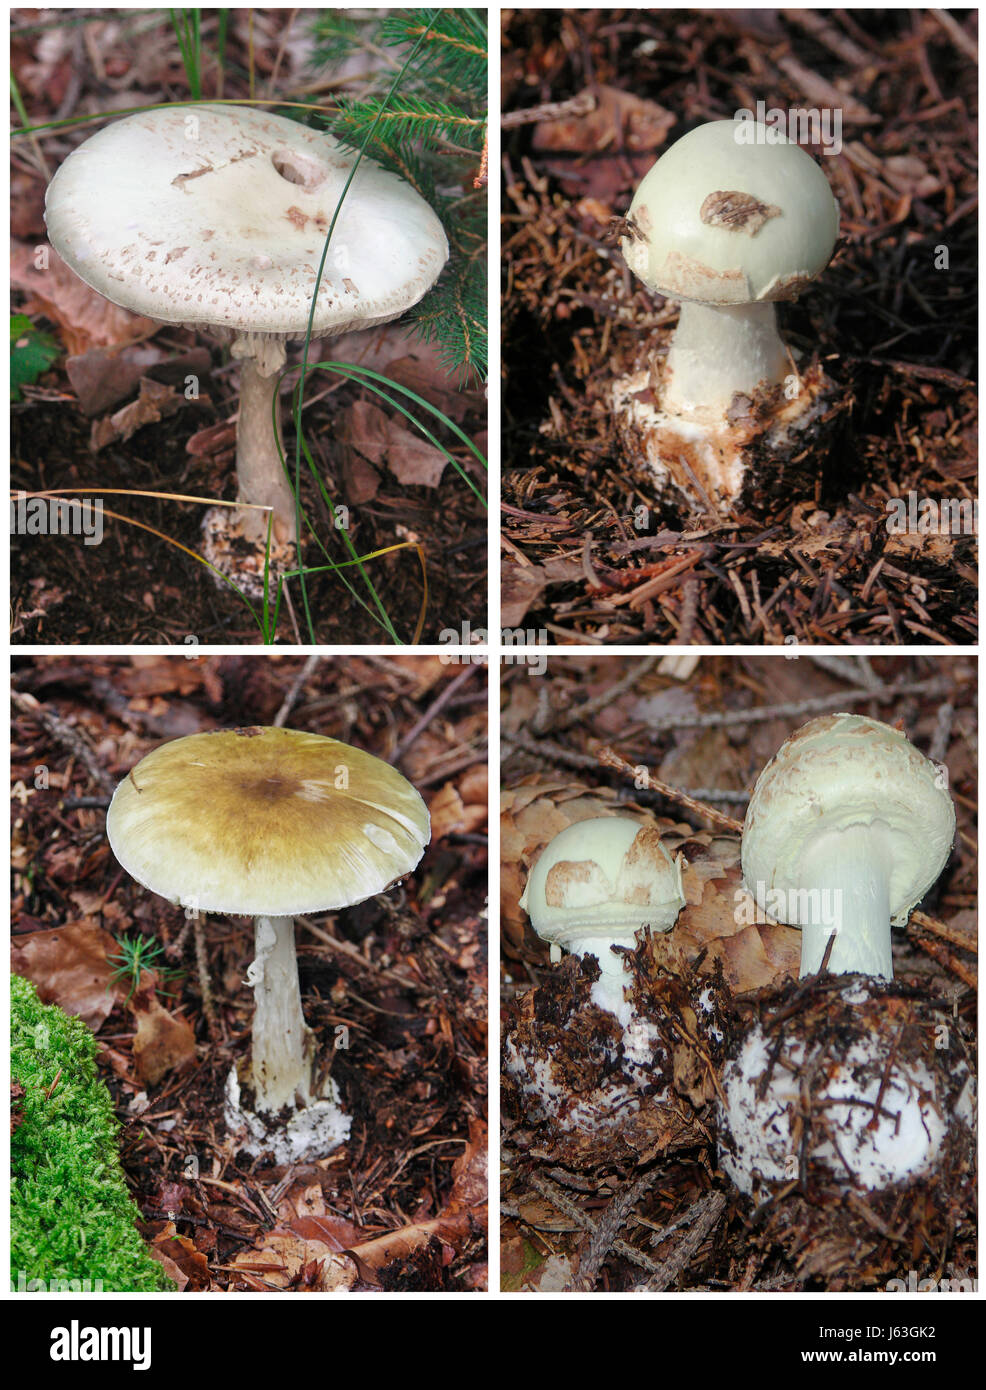 detail death angel angels mushrooms mushroom fungus forest toxic poisonous fall Stock Photo